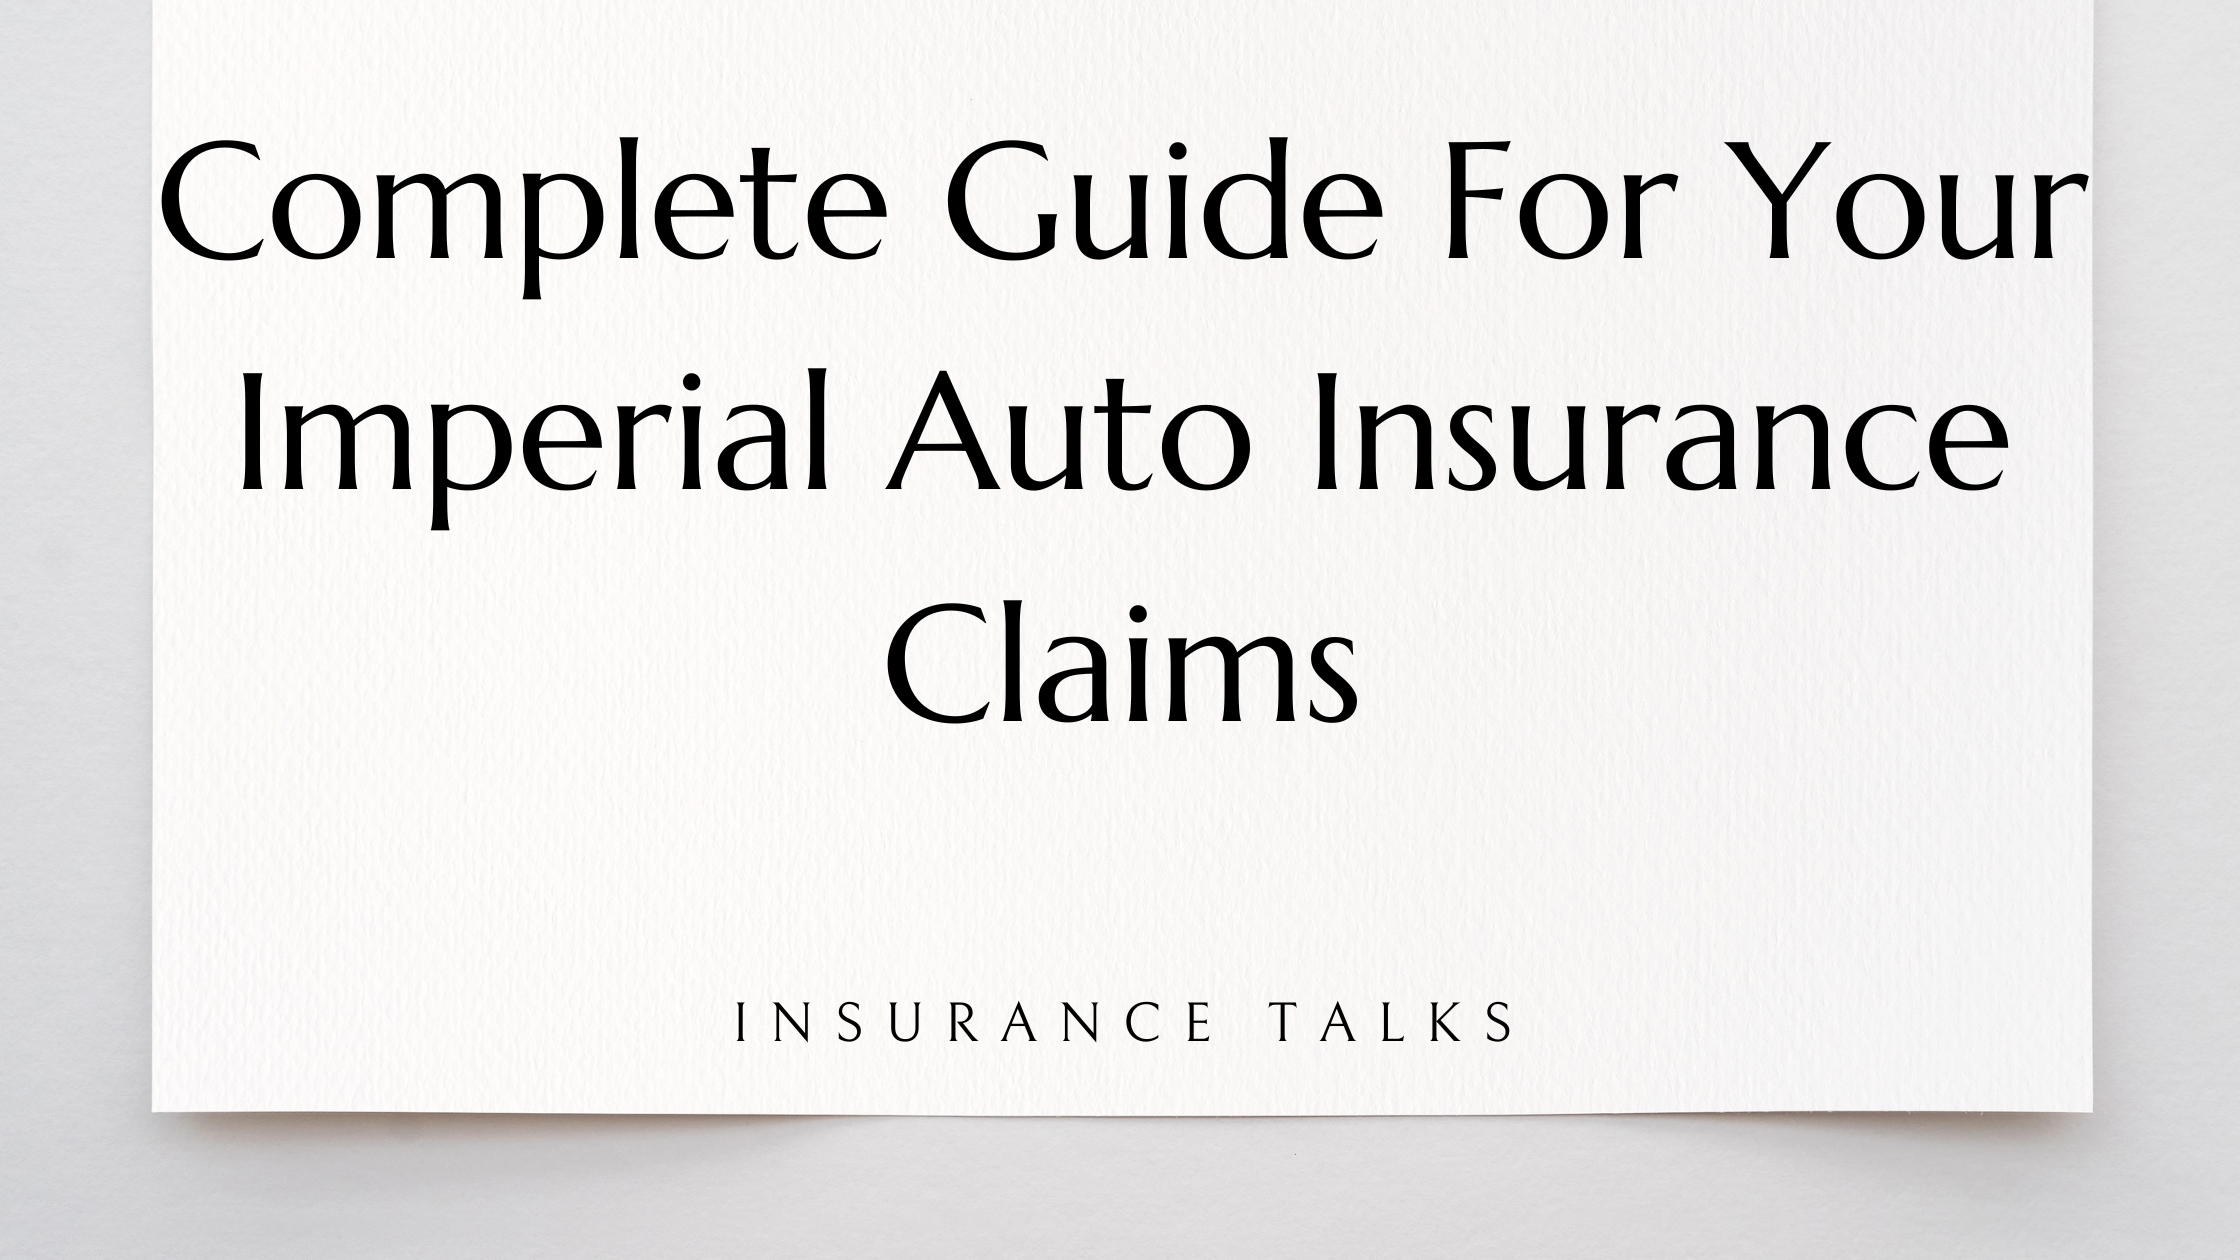 Complete Guide For Your Imperial Auto Insurance Claims